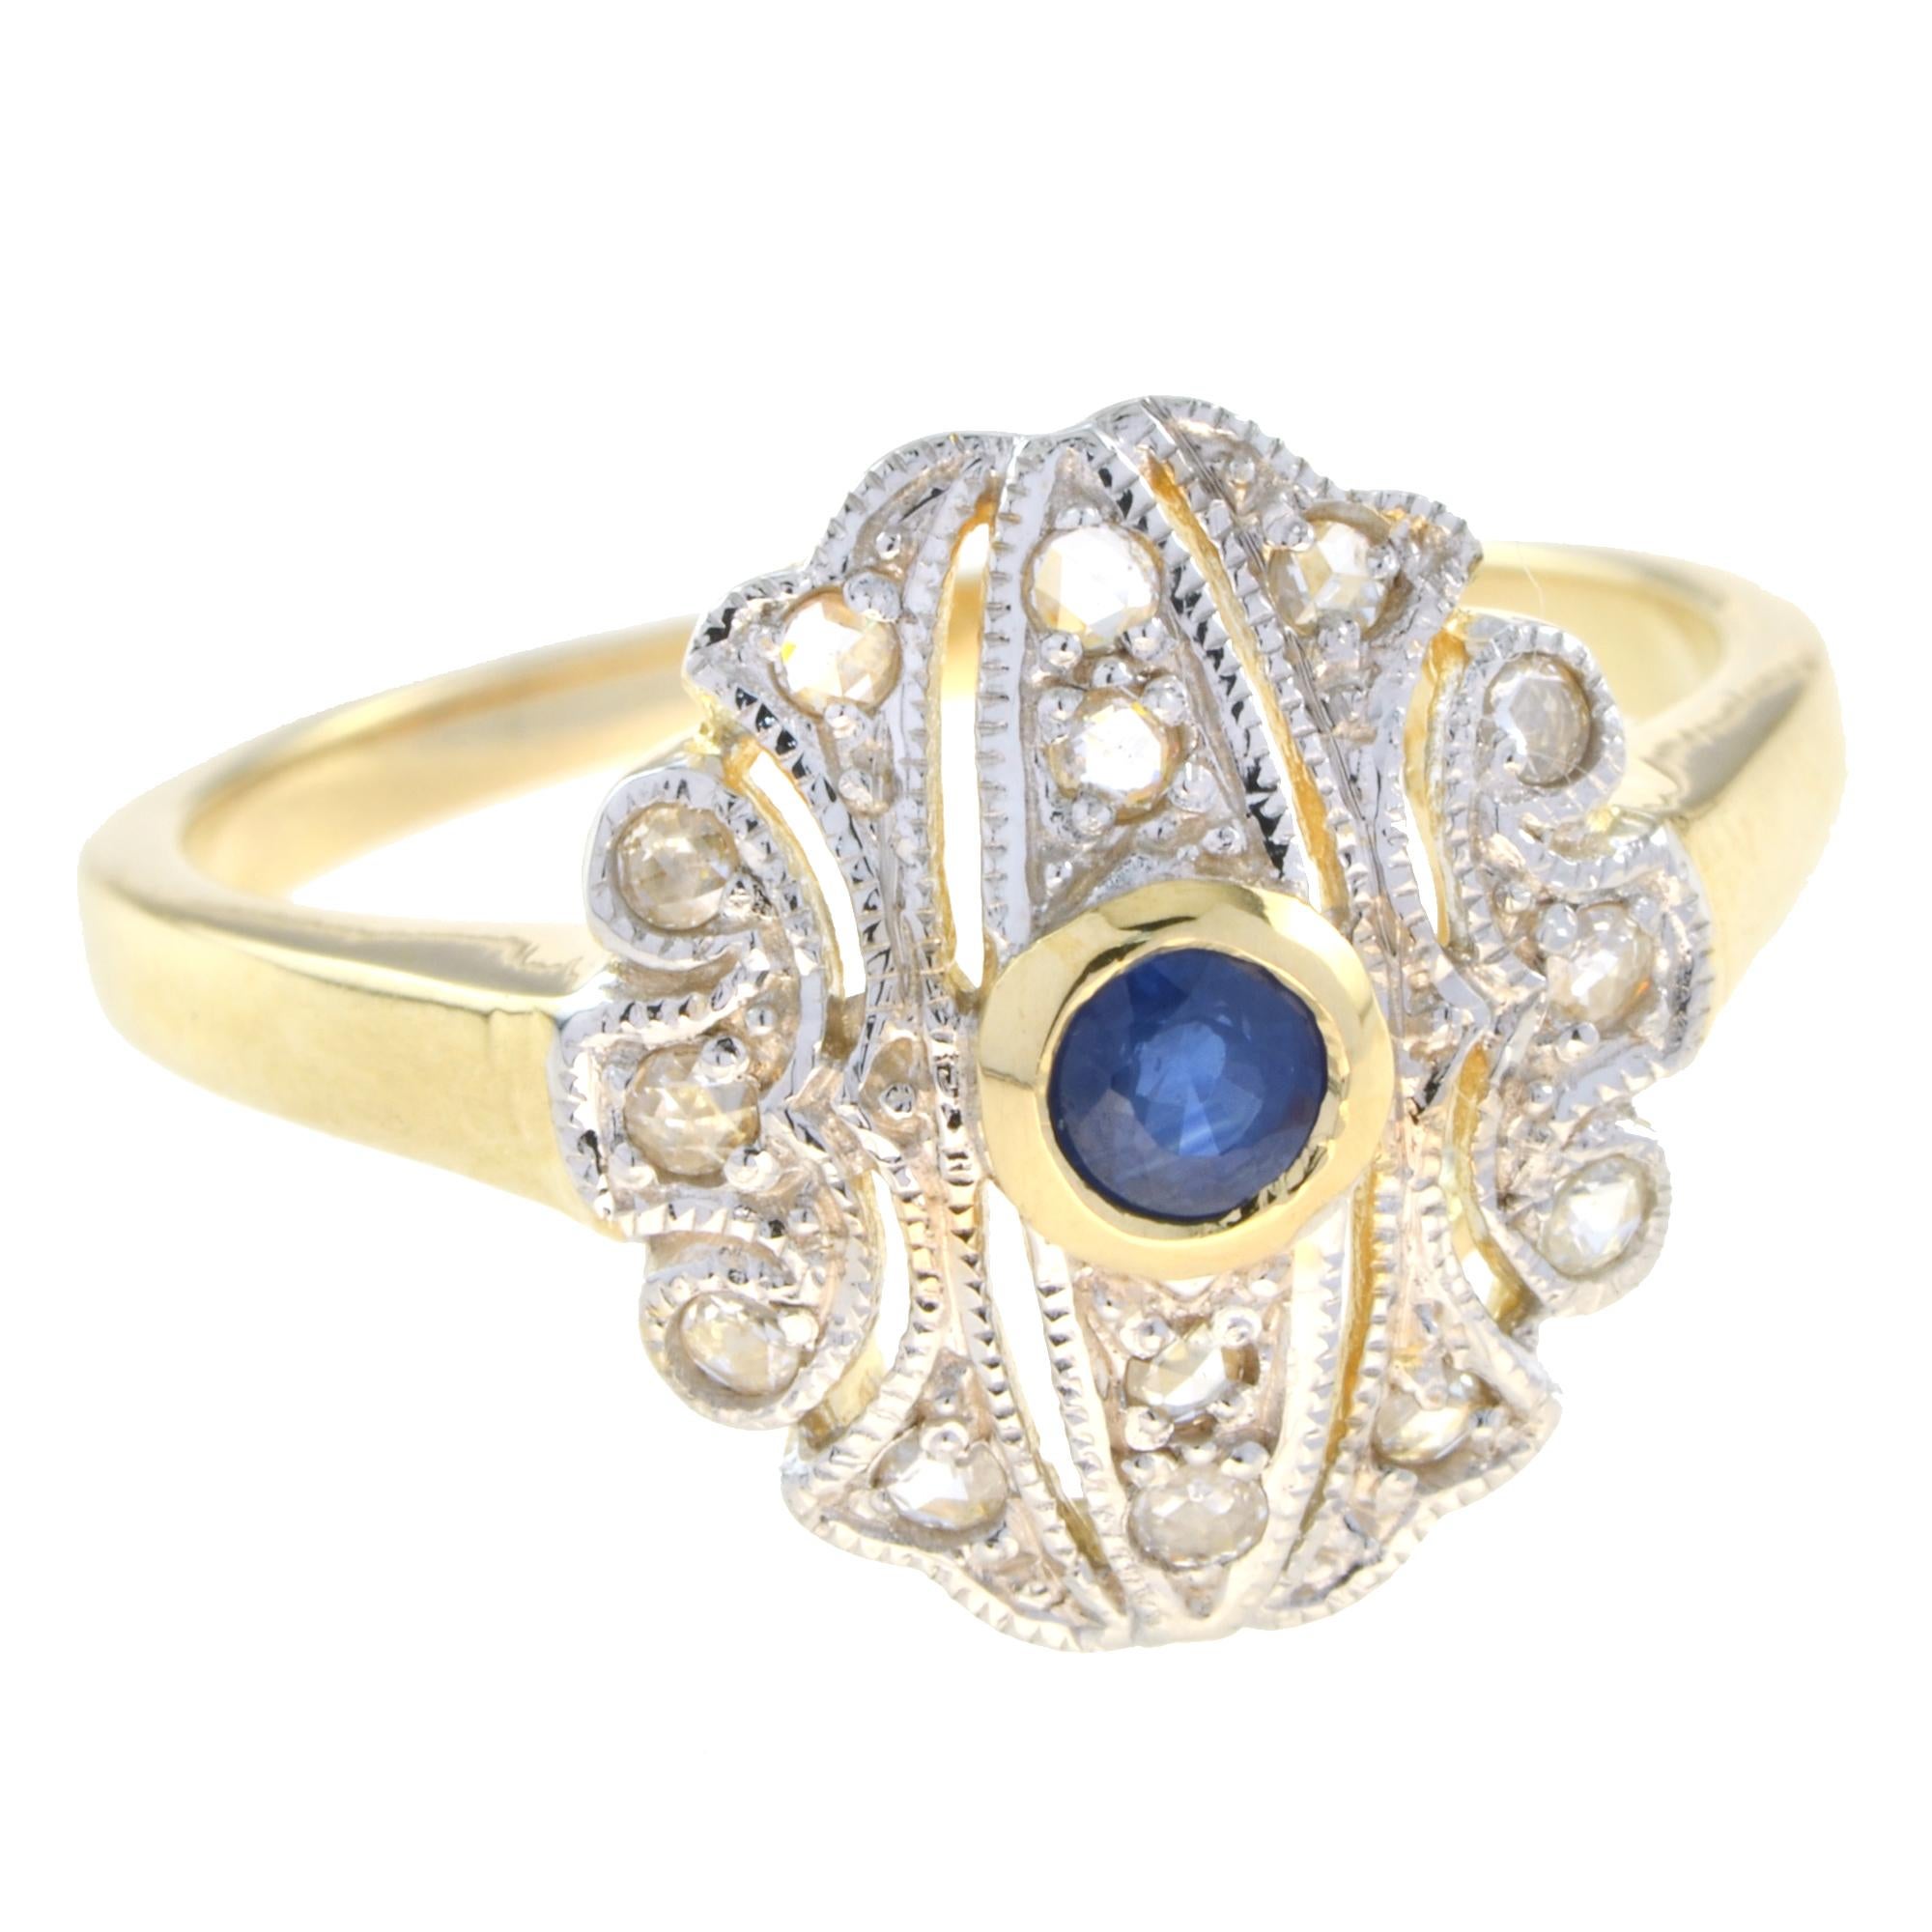 For Sale:  Antique Style Openwork Sapphire and Diamond Ring in 14K Yellow Gold 3